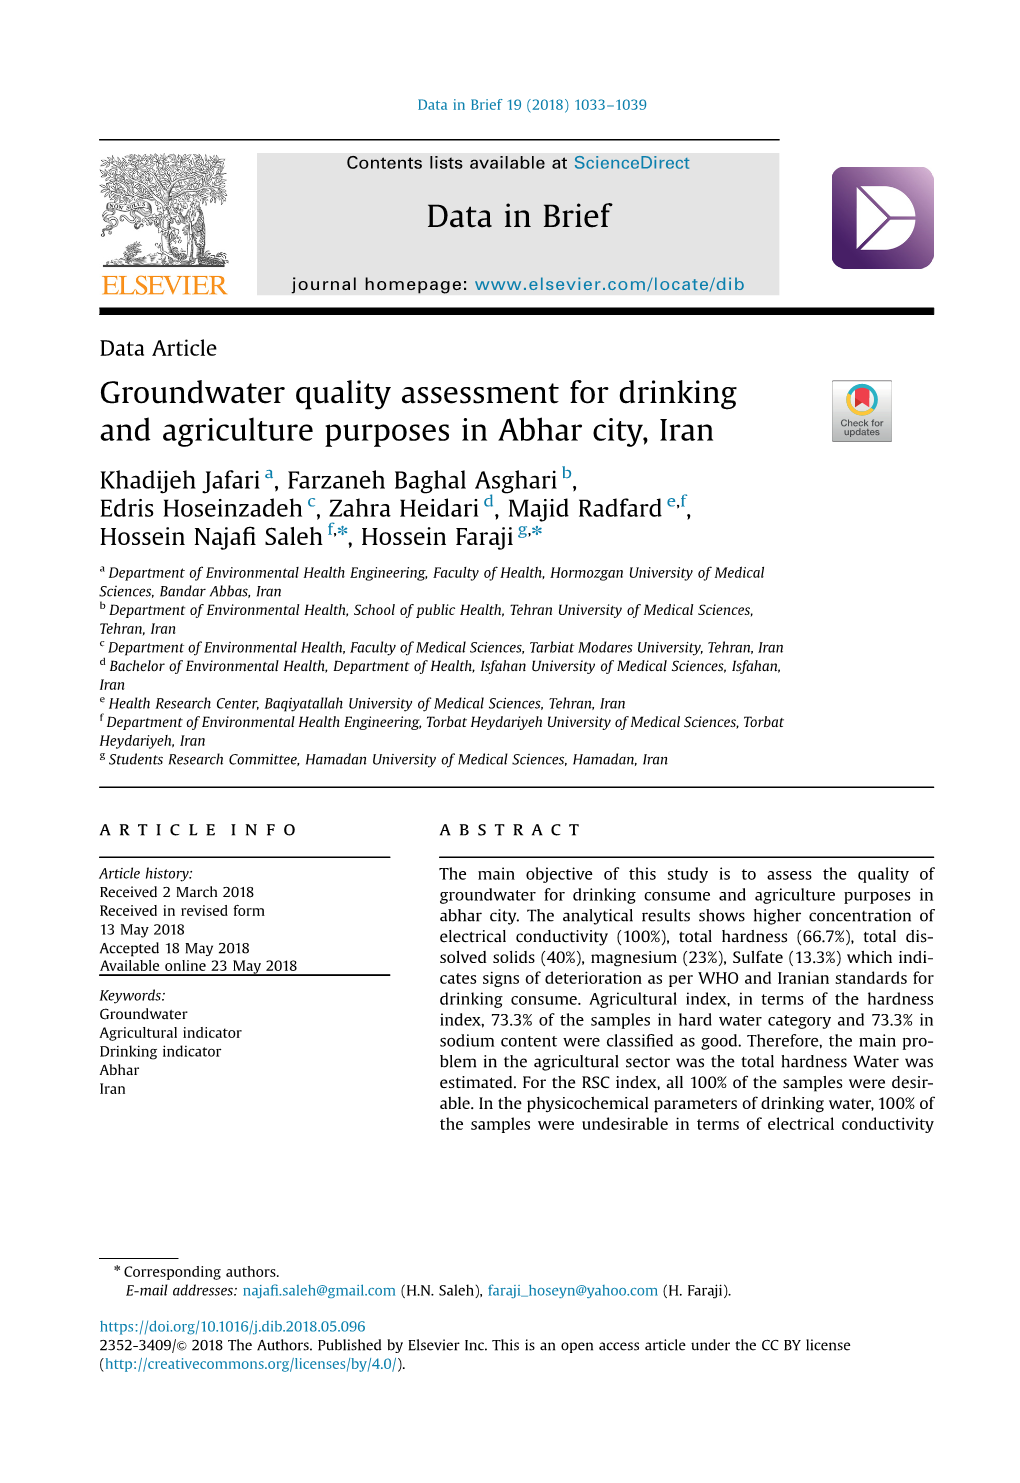 Groundwater Quality Assessment for Drinking and Agriculture Purposes in Abhar City, Iran